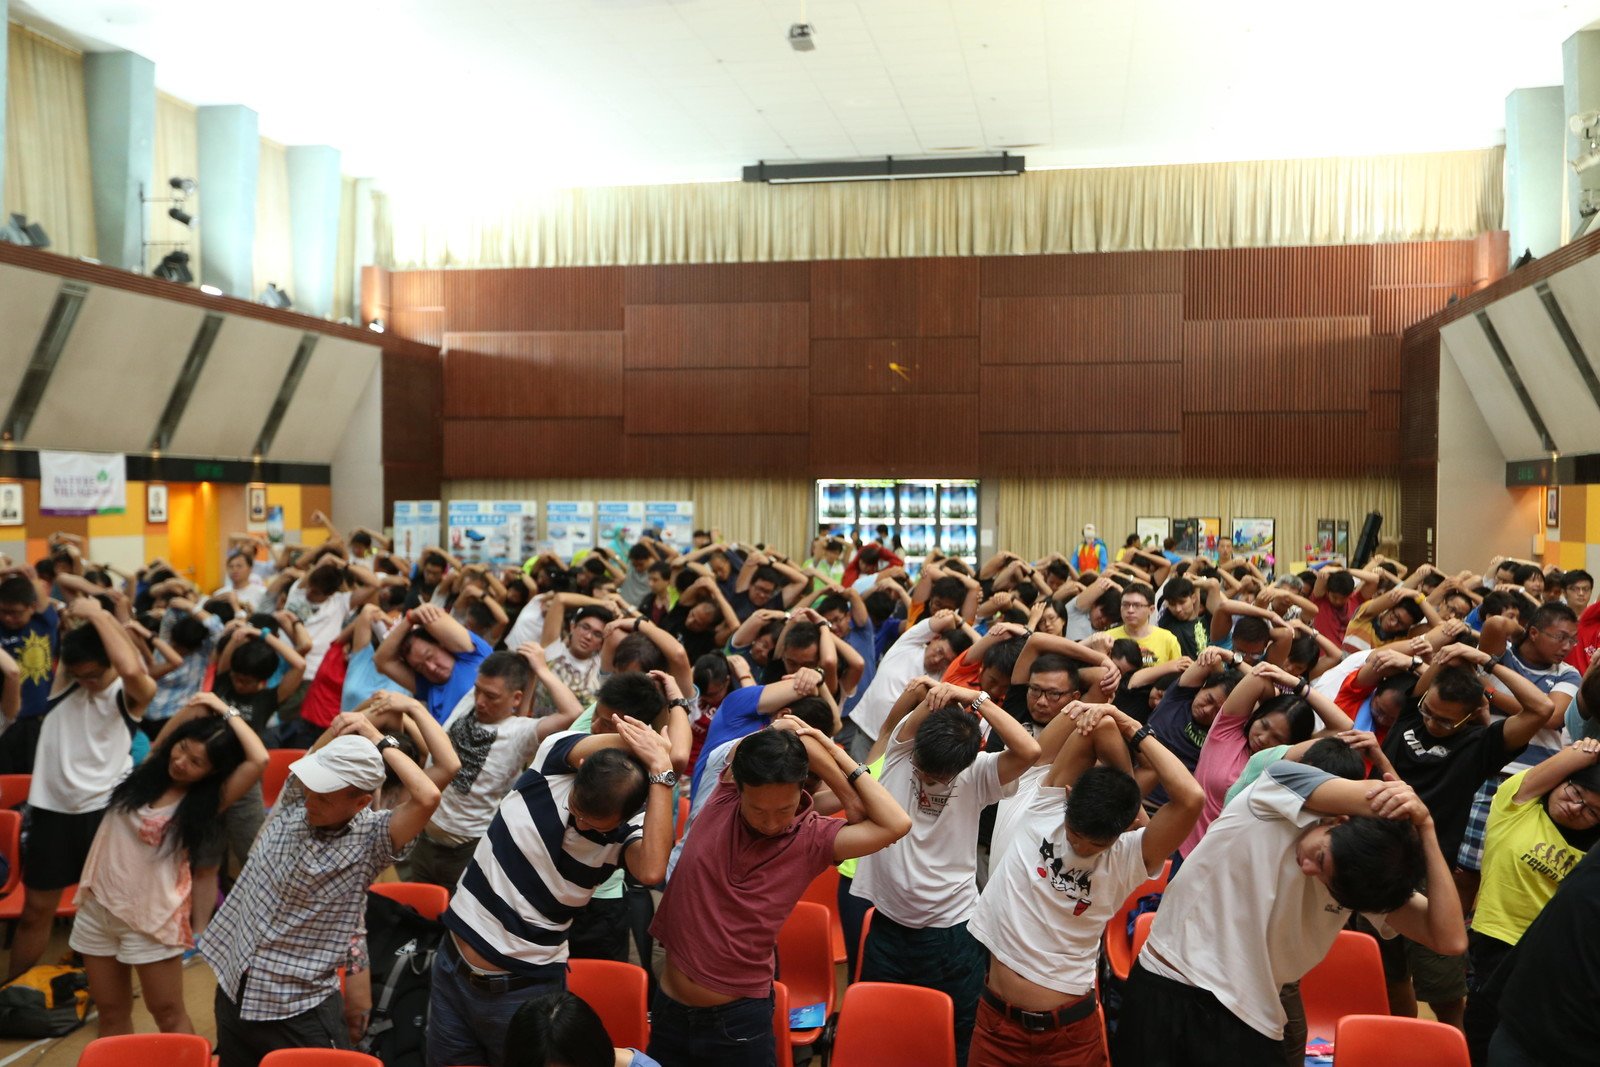 Over 300 walkers attended the Oxfam Trailwalker 2014 Briefing and they were practicing warm-up exercise.